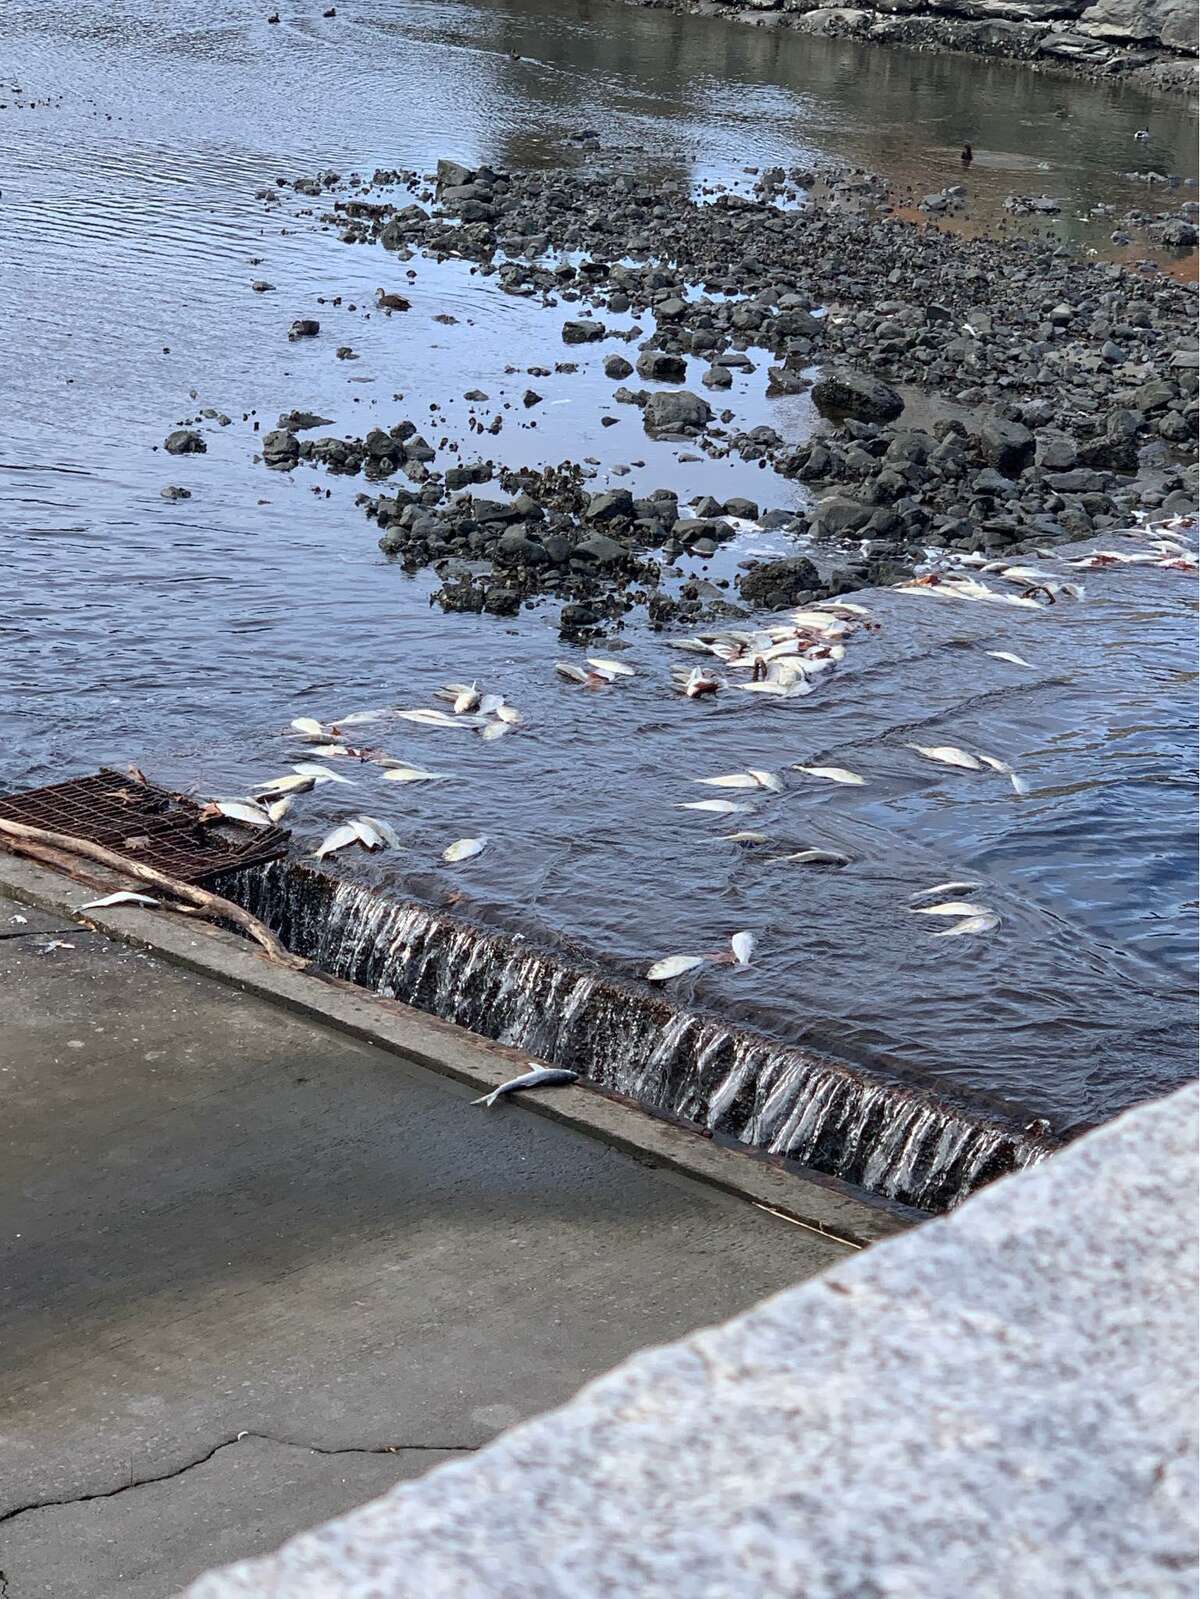 A Darien resident recently shared this photo of dead fish, which specialists identify as bunker, near the Ring's End Bridge.